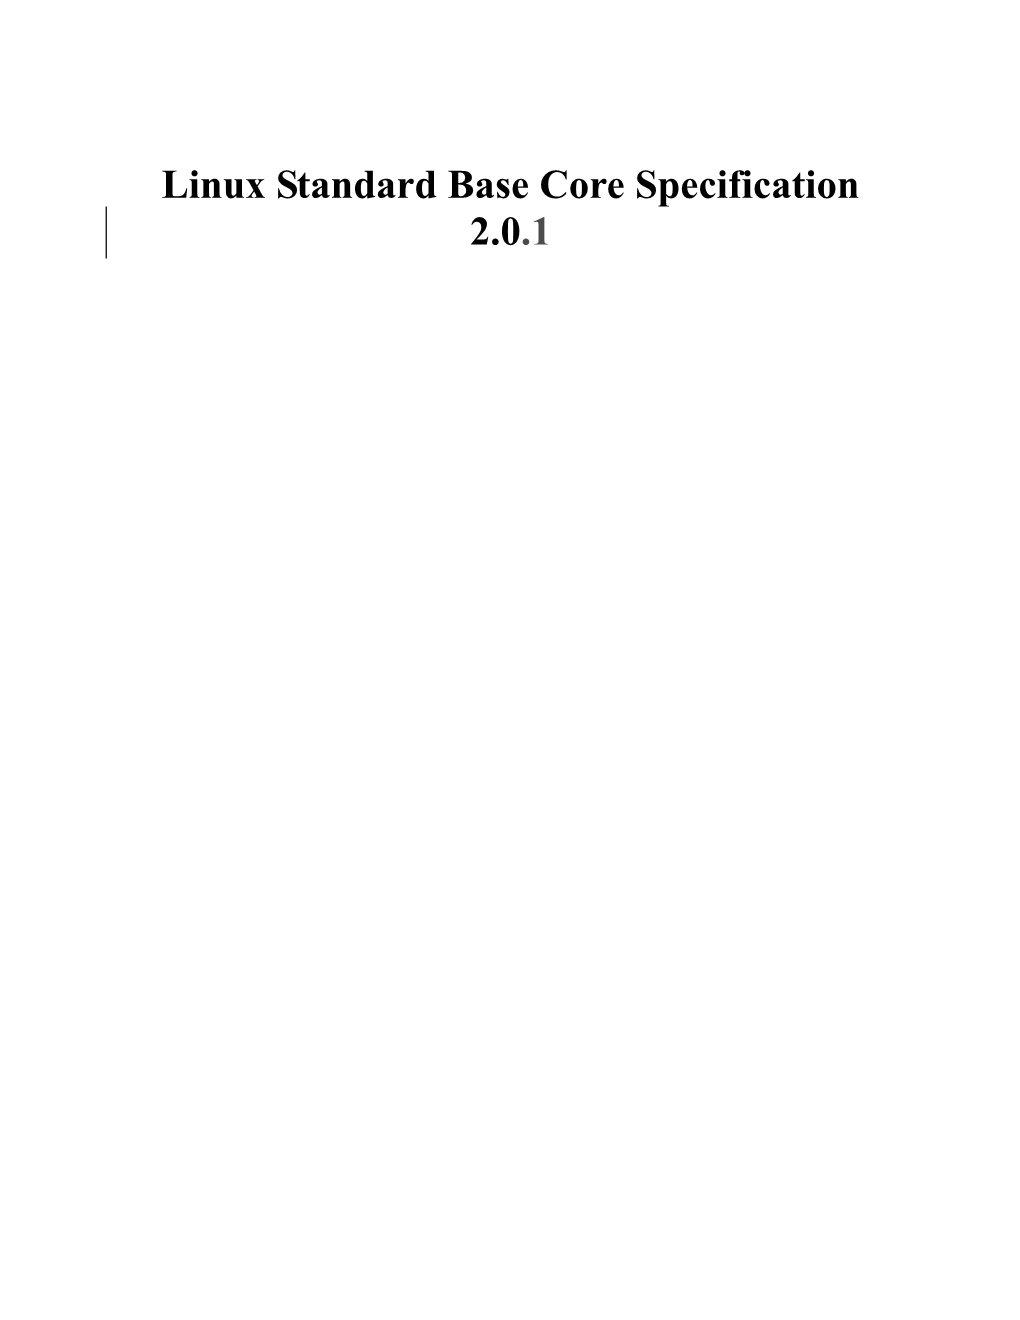 Linux Standard Base Core Specification 2.0.1